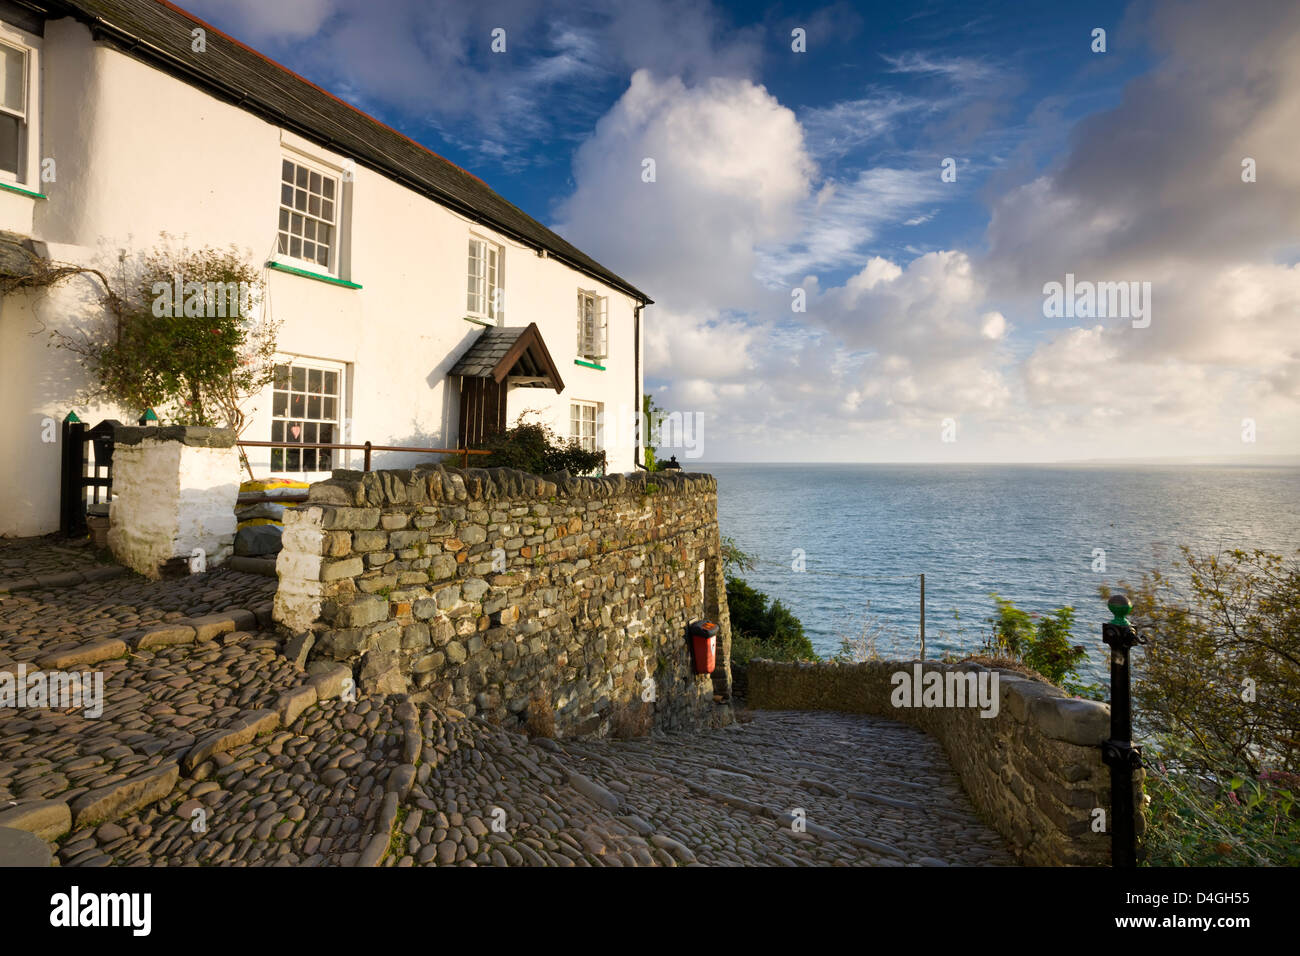 Whitewashed cottage and cobbled lane in the picturesque village of Clovelly, Devon, England. Autumn (September). Stock Photo